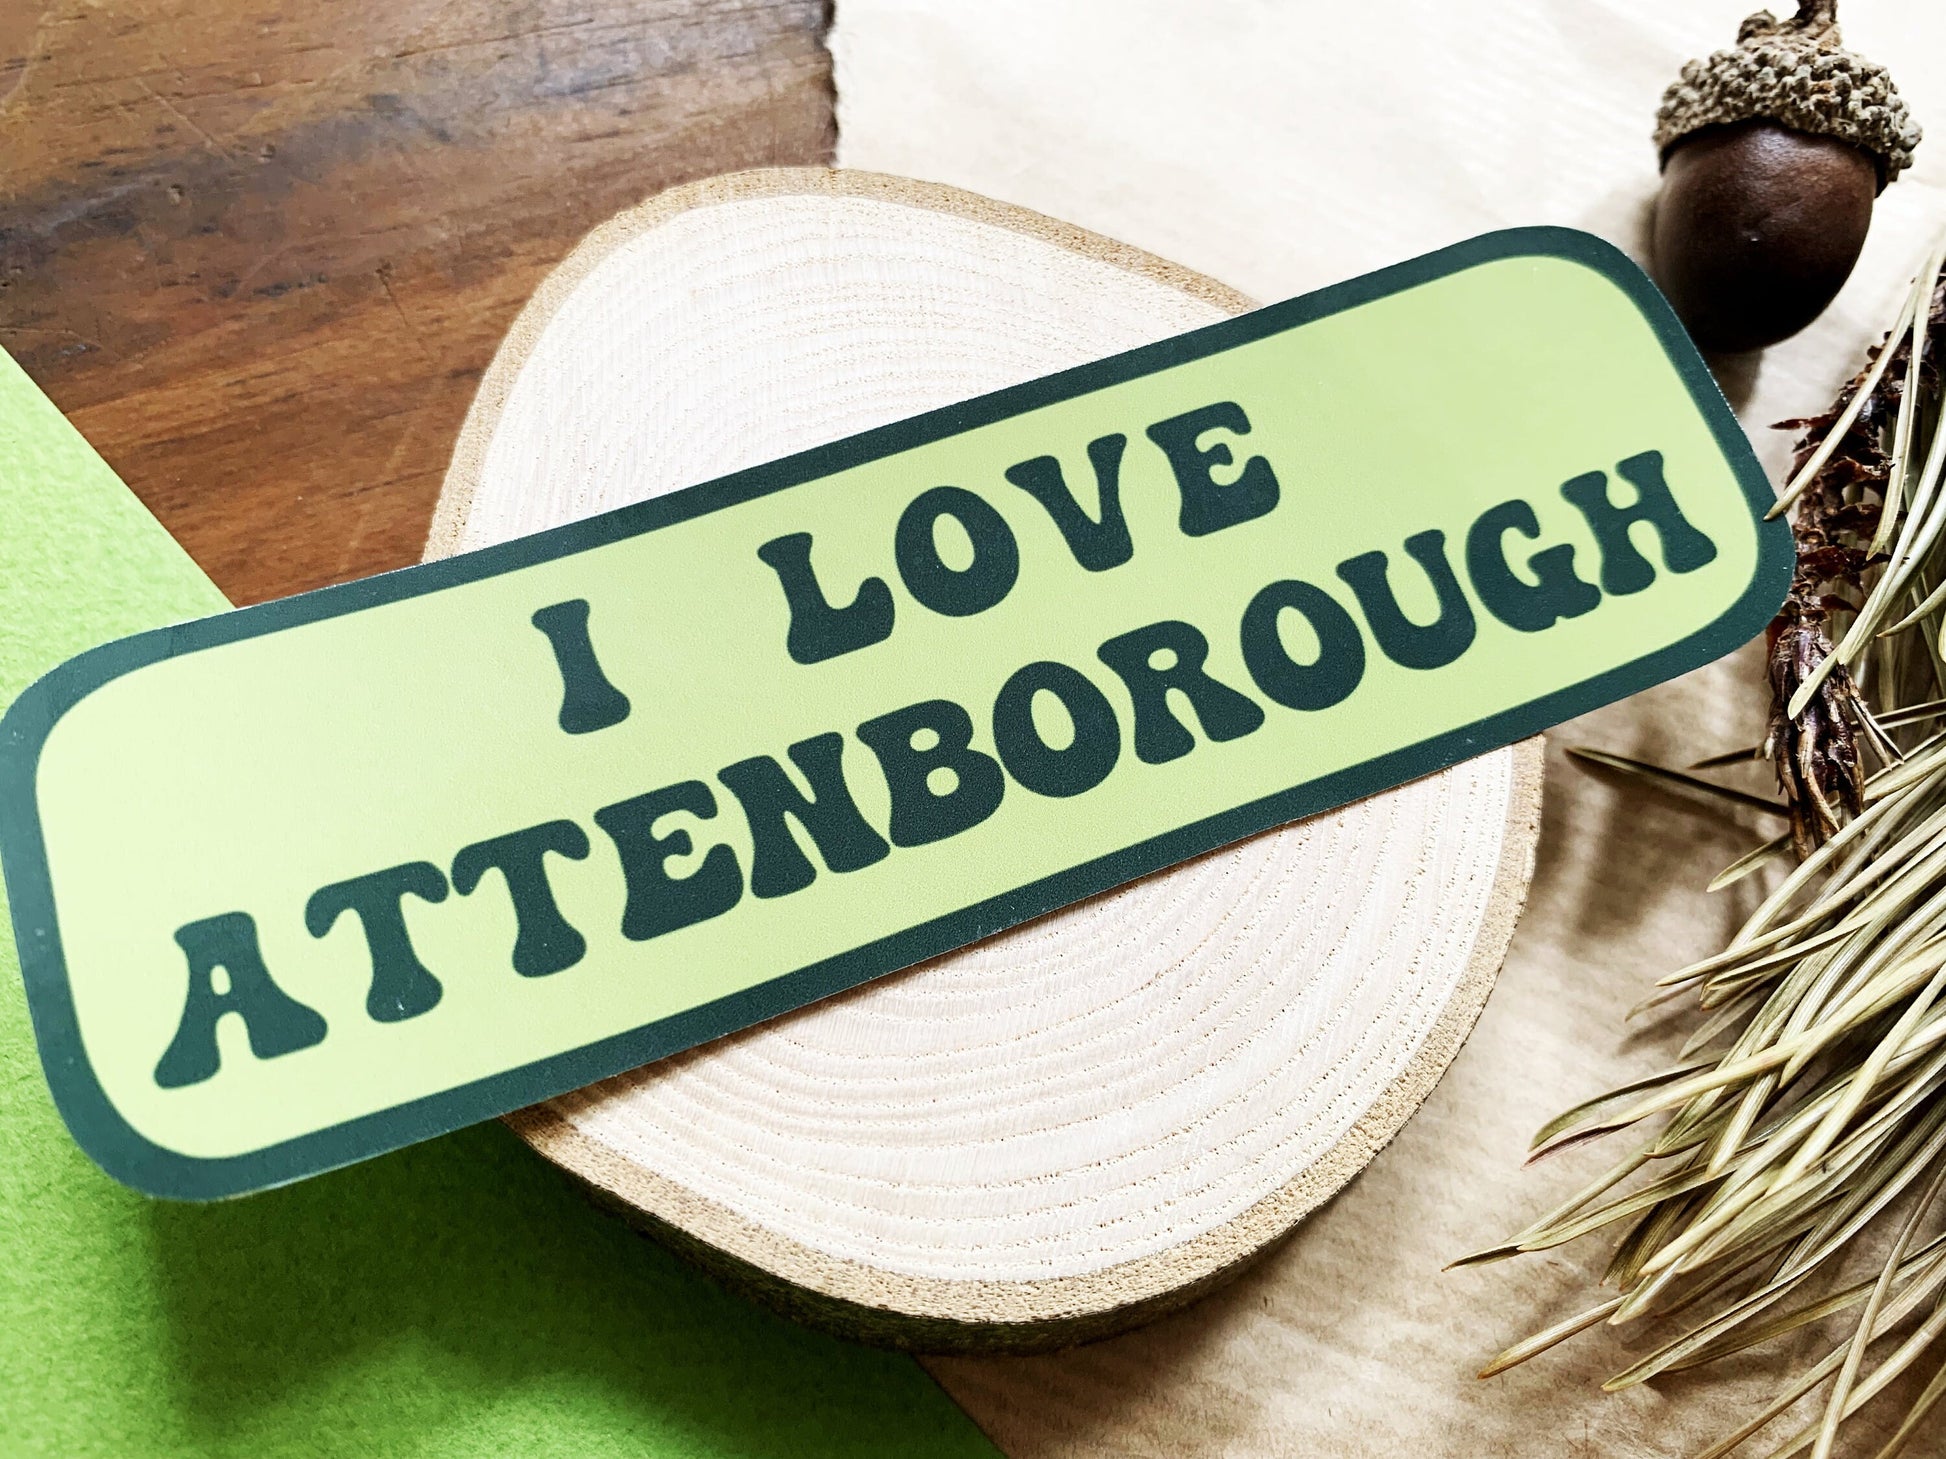 I Love Attenbrough Phone Sticker, David Attenborough and Nature Documentary Lovers, Natural History Themed Small Gift, Retro Style Sticker